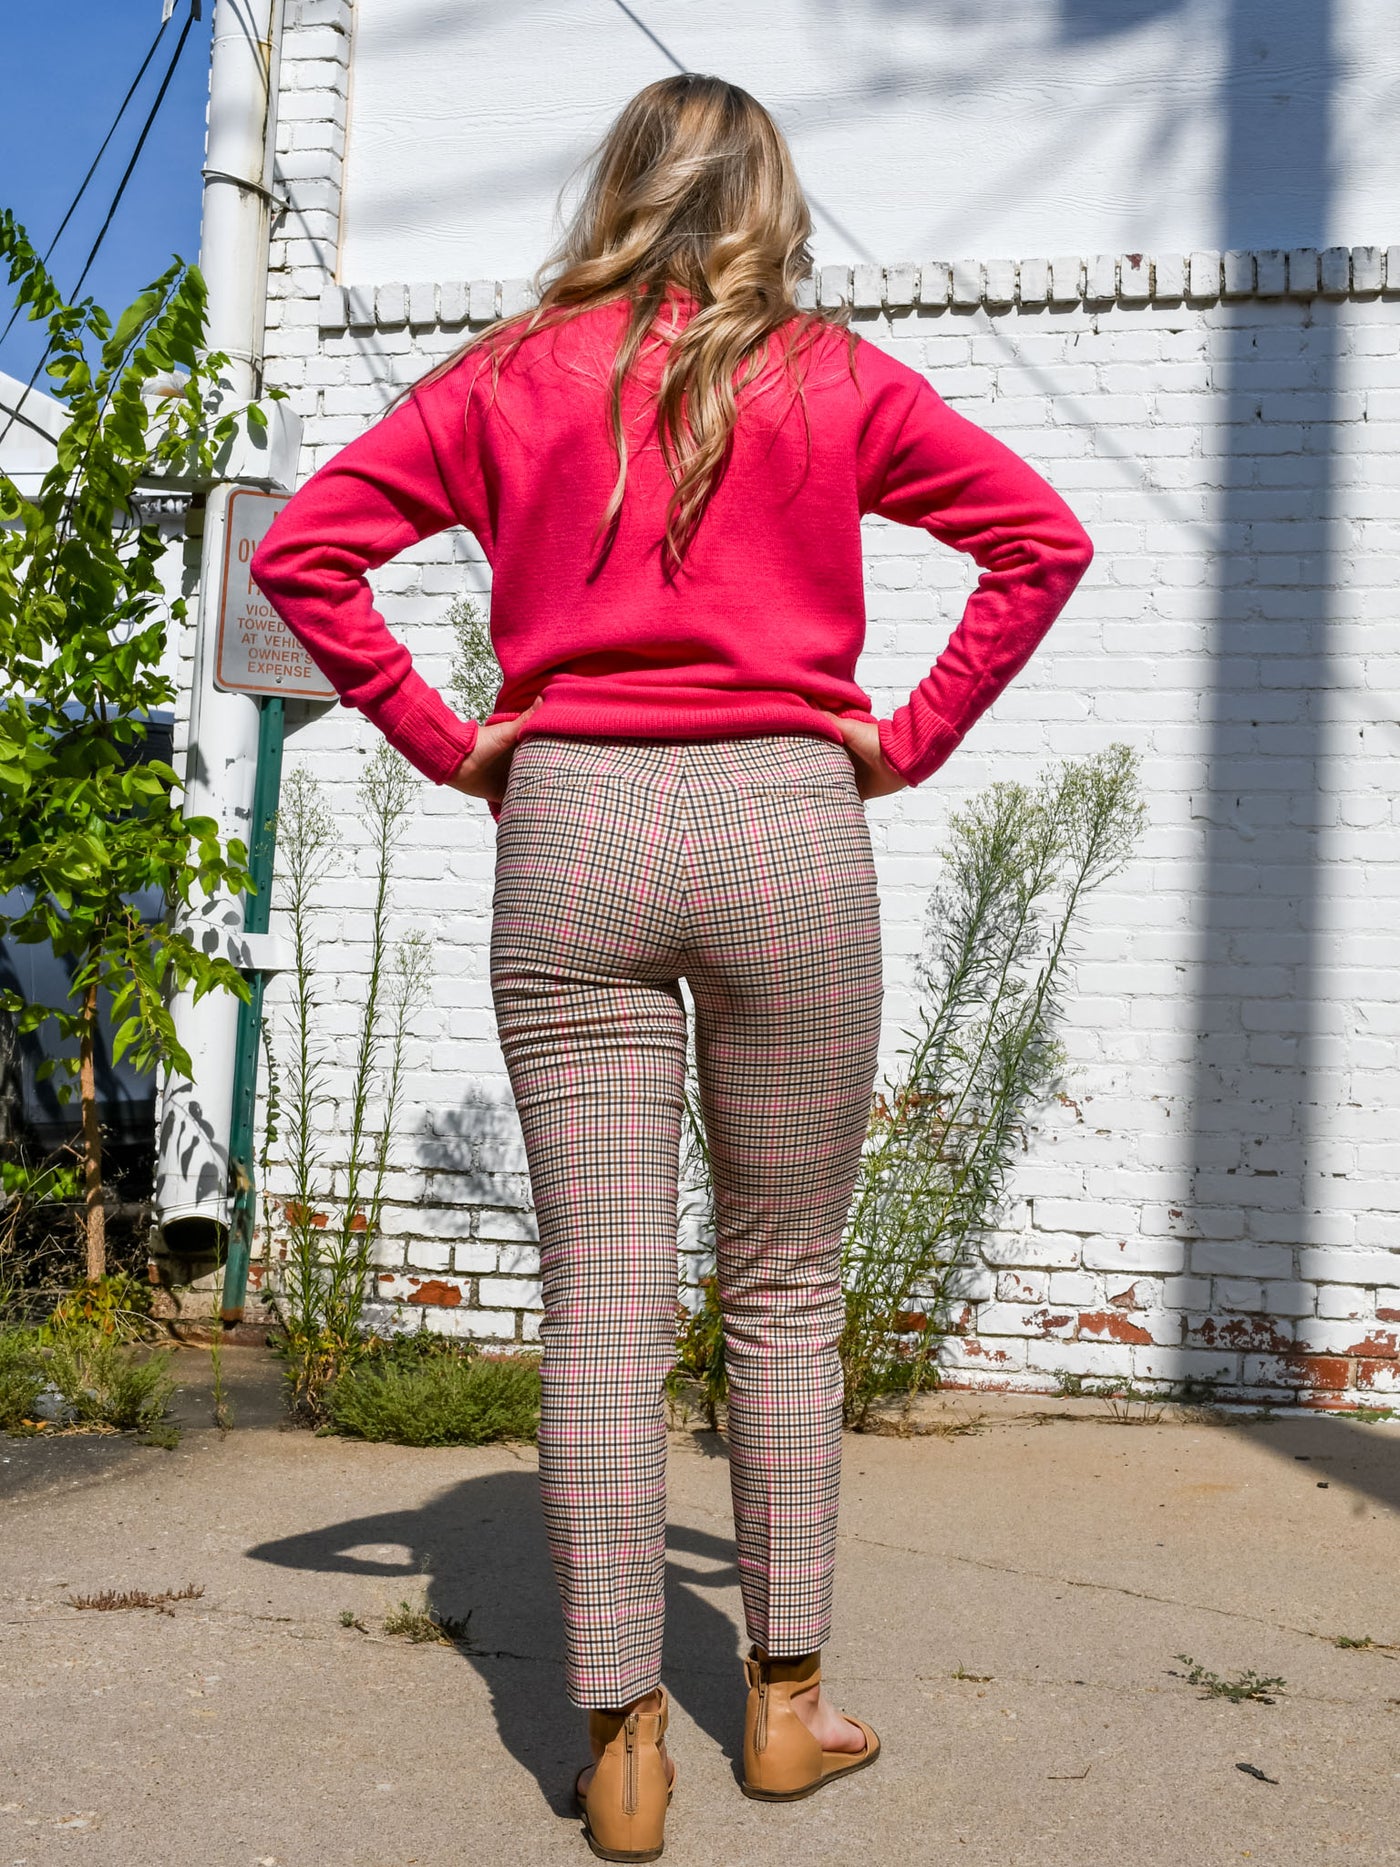 A model wearing a pair of pink plaid ankle length dress pants. The model has them paired with a pink turtleneck sweater, a beige purse and brown sandals.